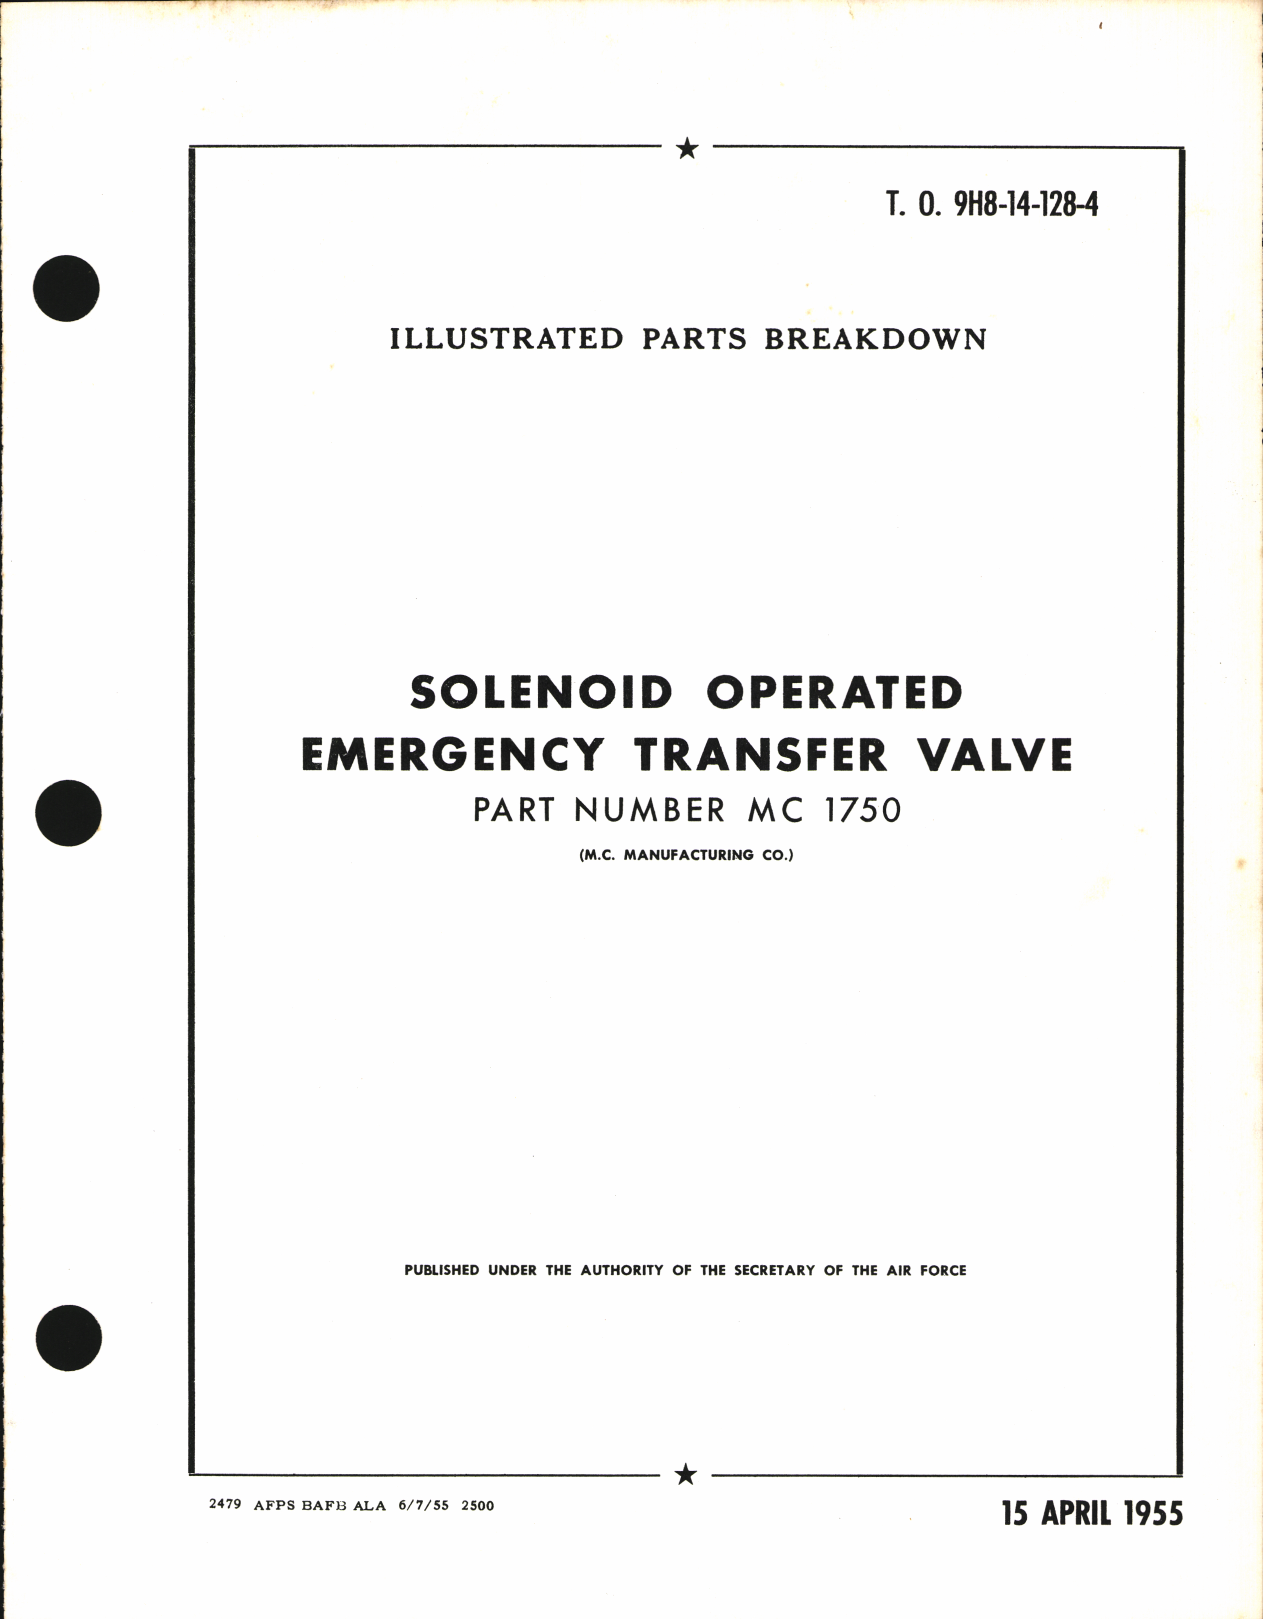 Sample page 1 from AirCorps Library document: Illustrated Parts Breakdown for Solenoid Operated Emergency Transfer Valve Part no. MC 1750